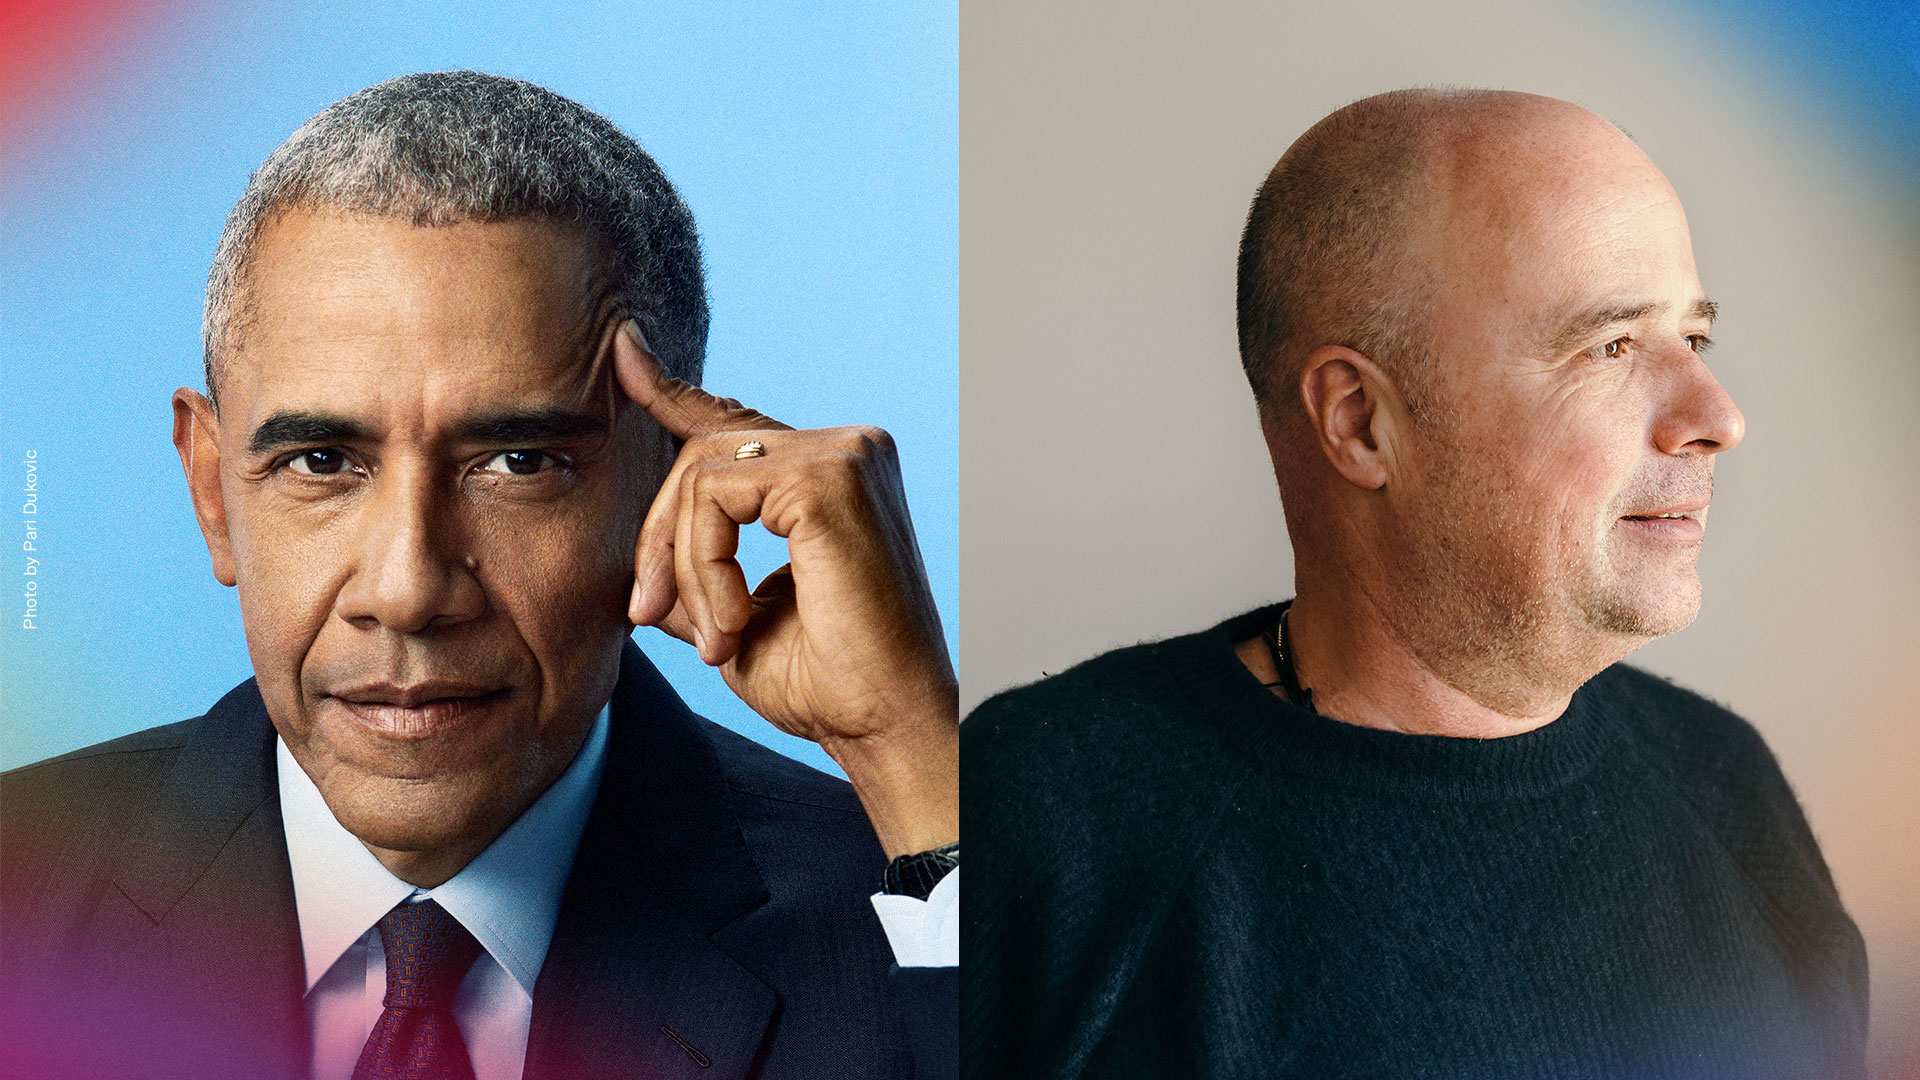 Barack Obama to join SNF Co-President Andreas Dracopoulos in conversation